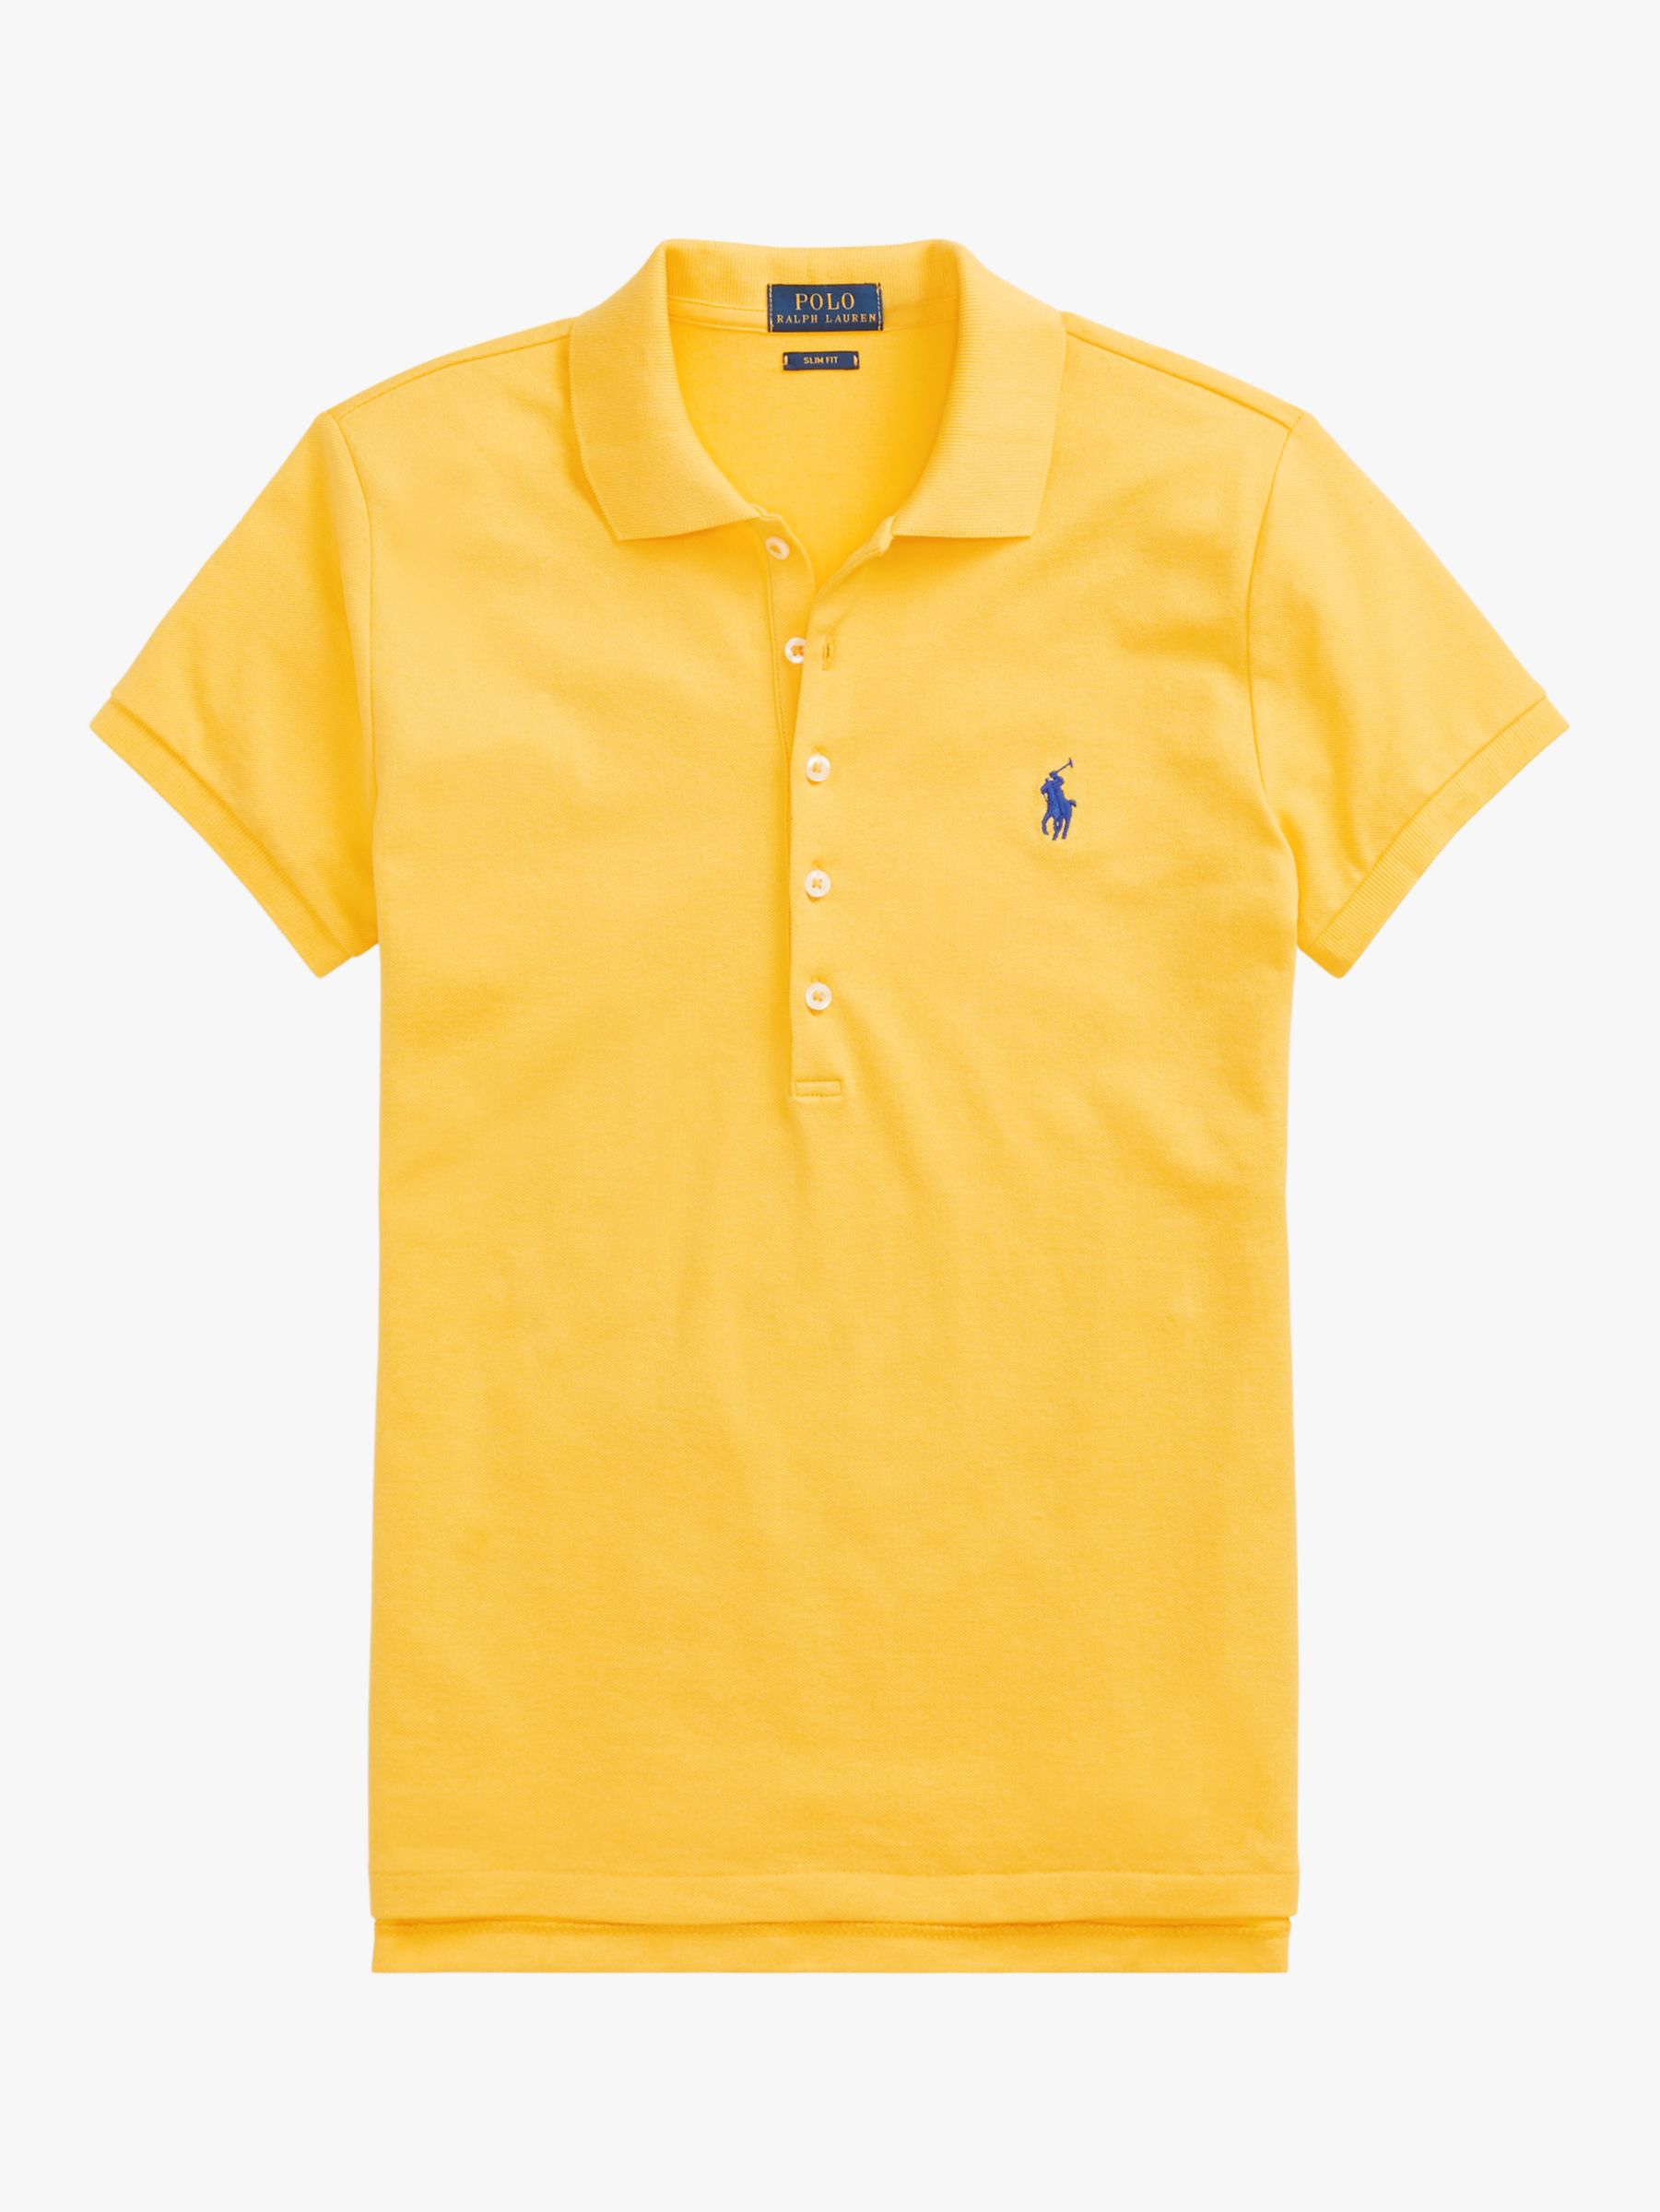 Polo Ralph Lauren Julie Skinny Fit Stretch Polo Shirt, Yellow